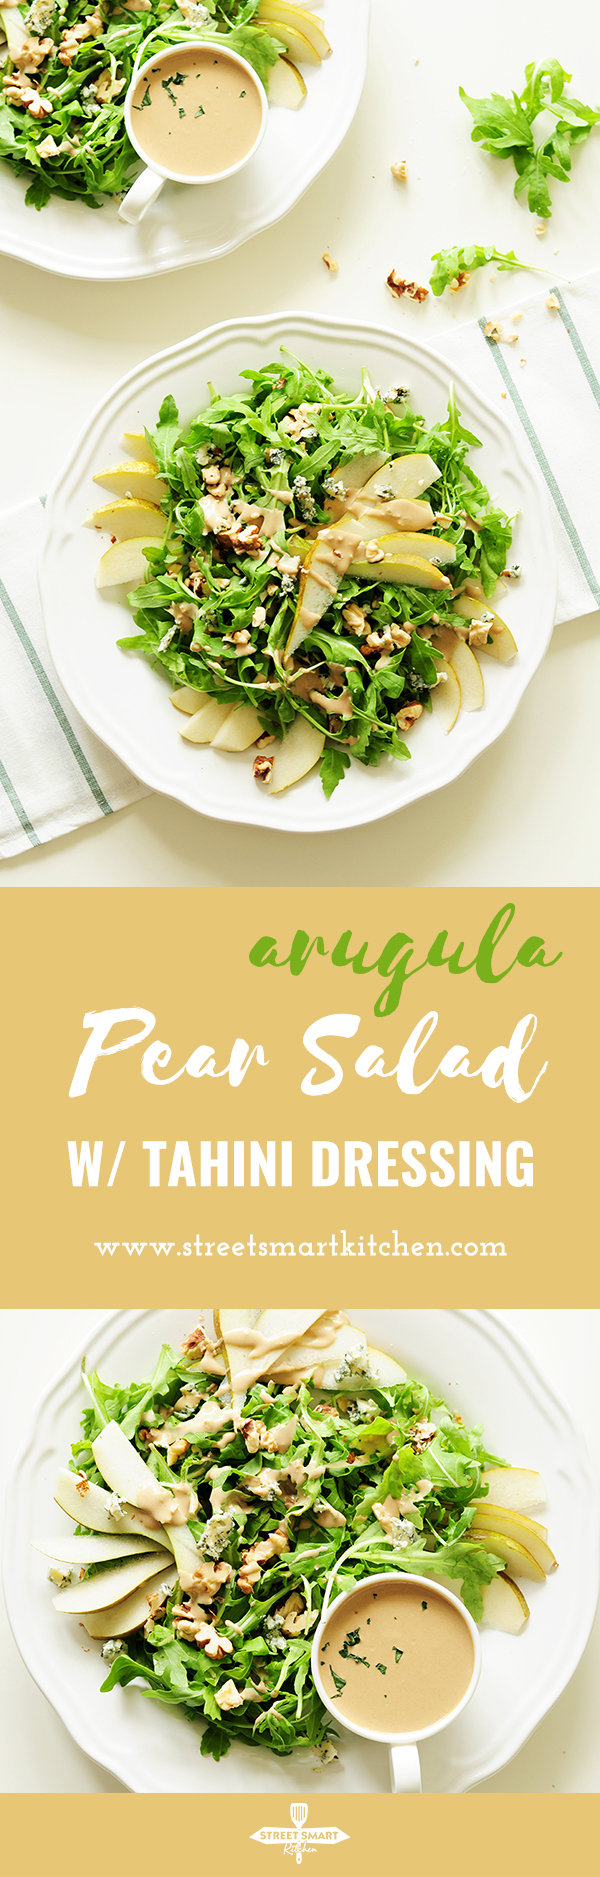 Topped with blue cheese and chopped walnuts, this four-ingredient arugula pear salad drizzled with tahini dressing is so quick to throw together, yet the combination of sweet and salty flavors and crunchy and soft textures proves that simple can be phenomenal.